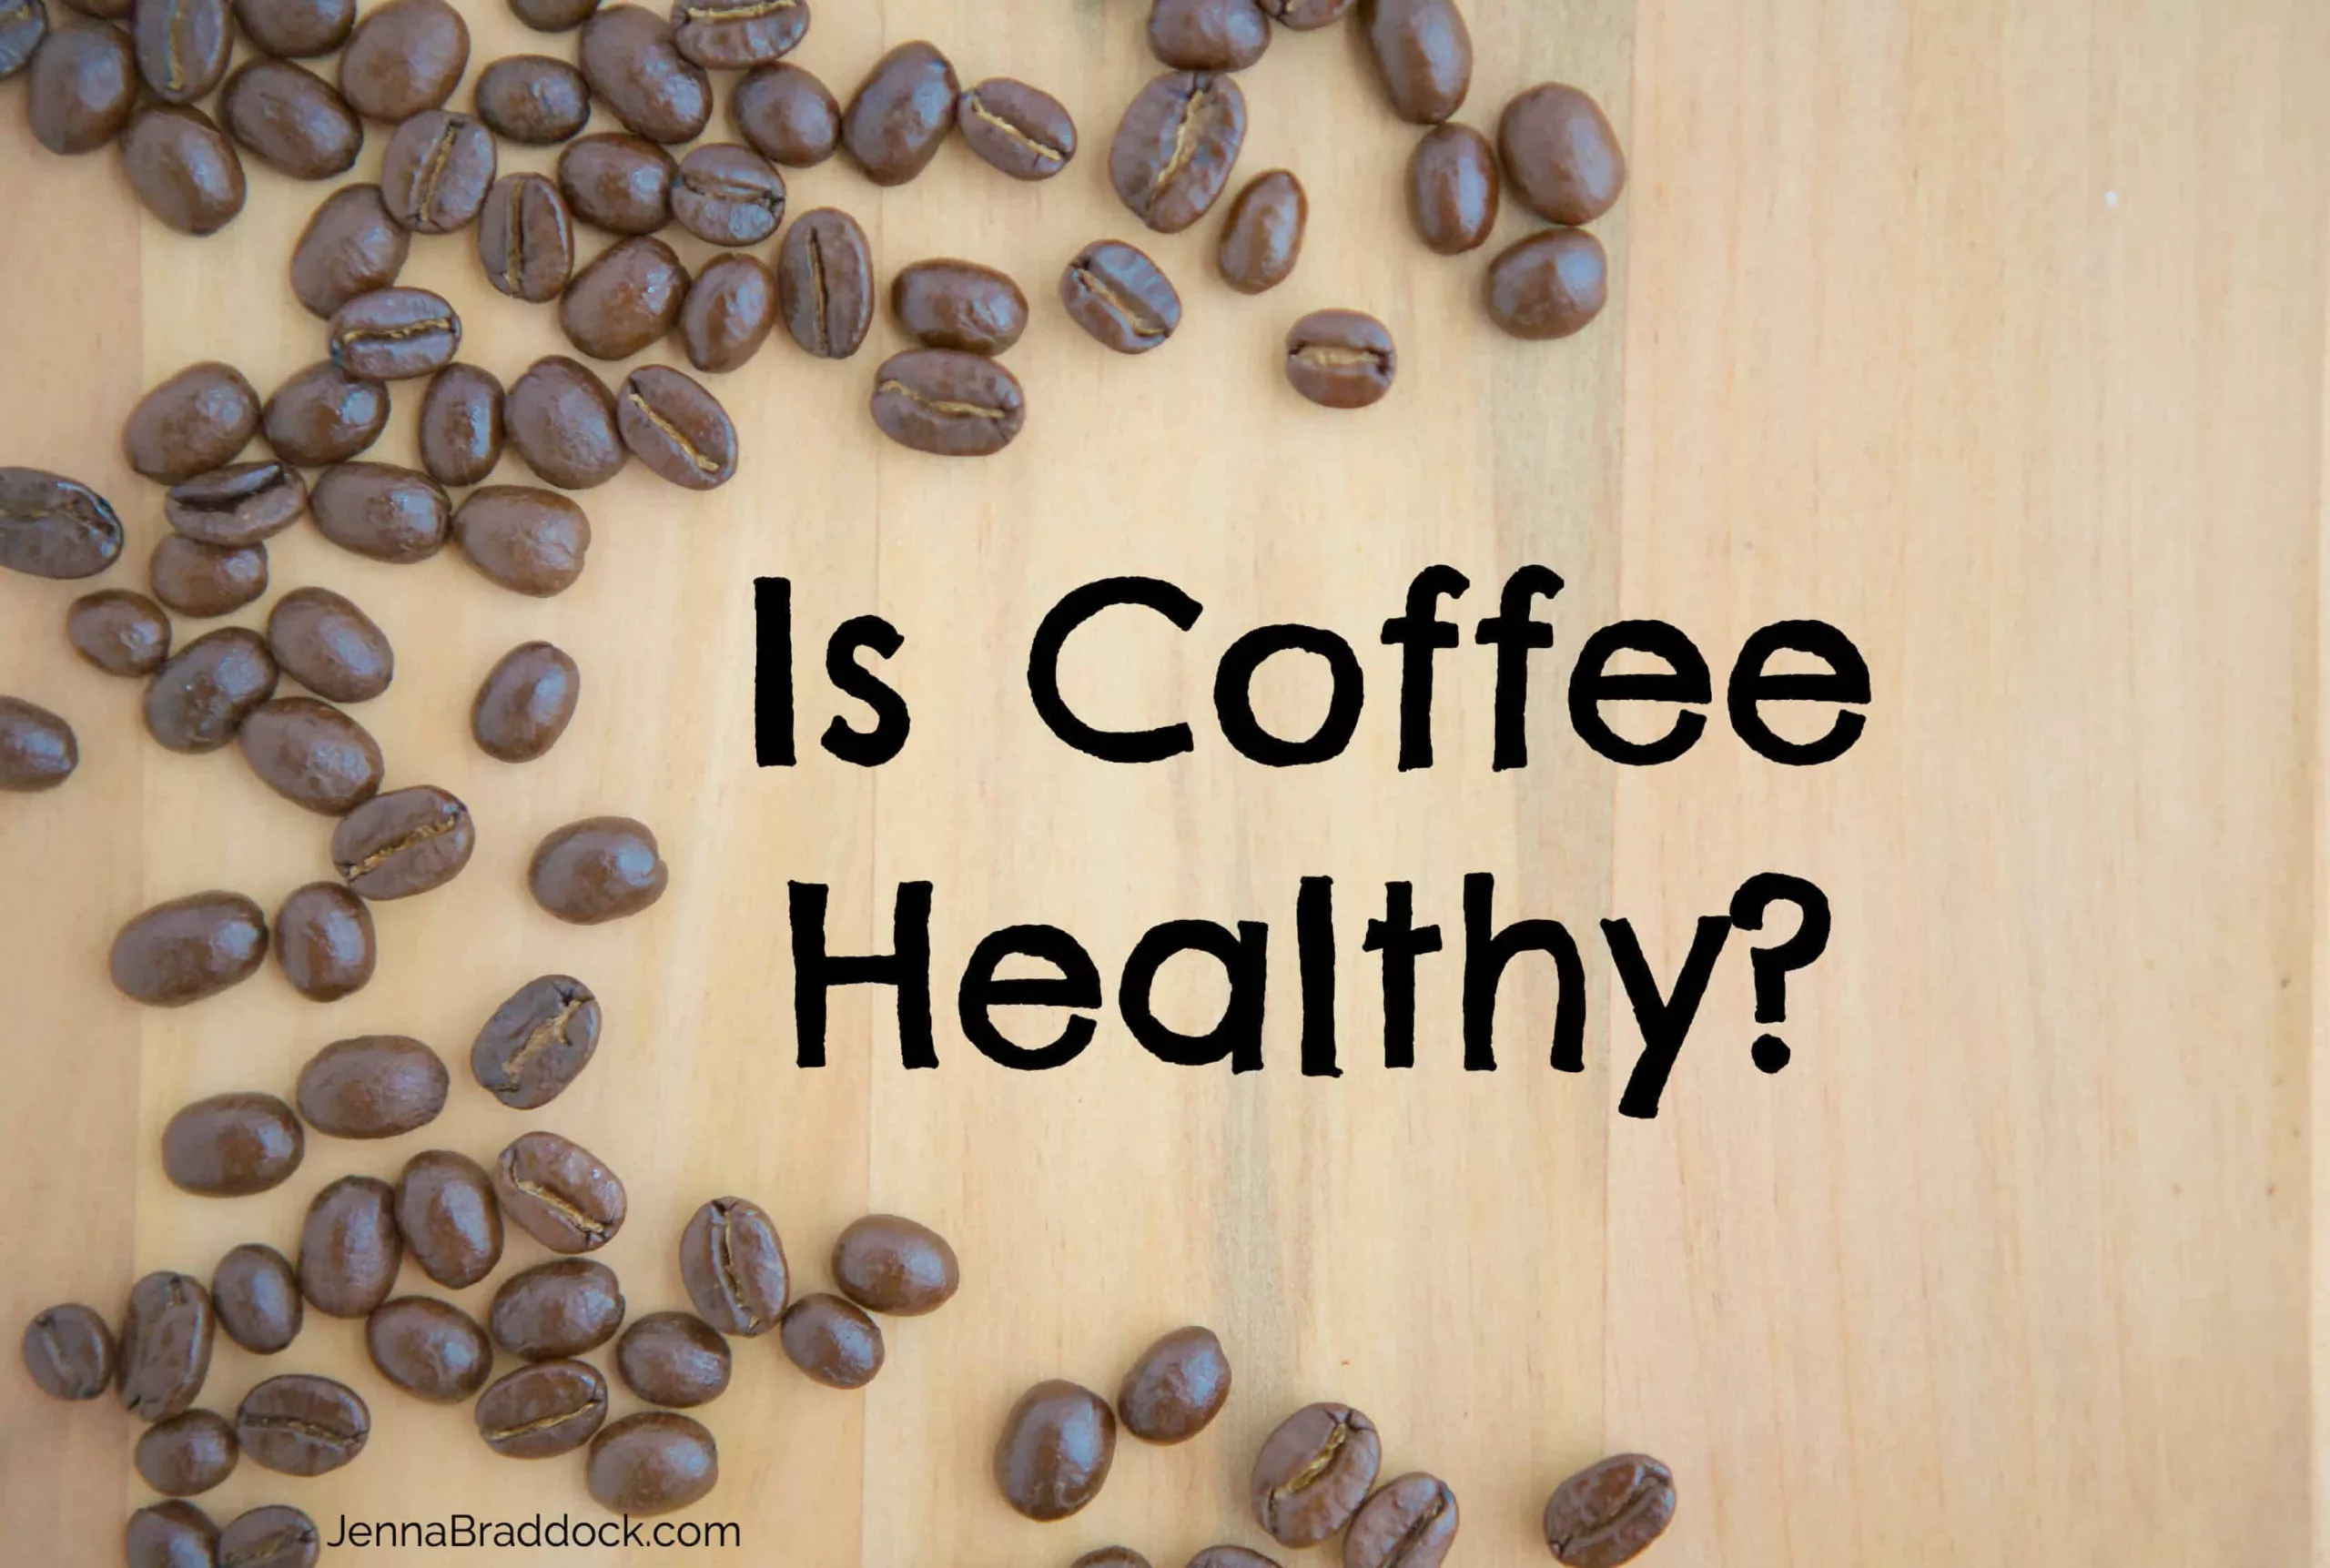 A Guide for Coffee Enthusiasts Considering Health